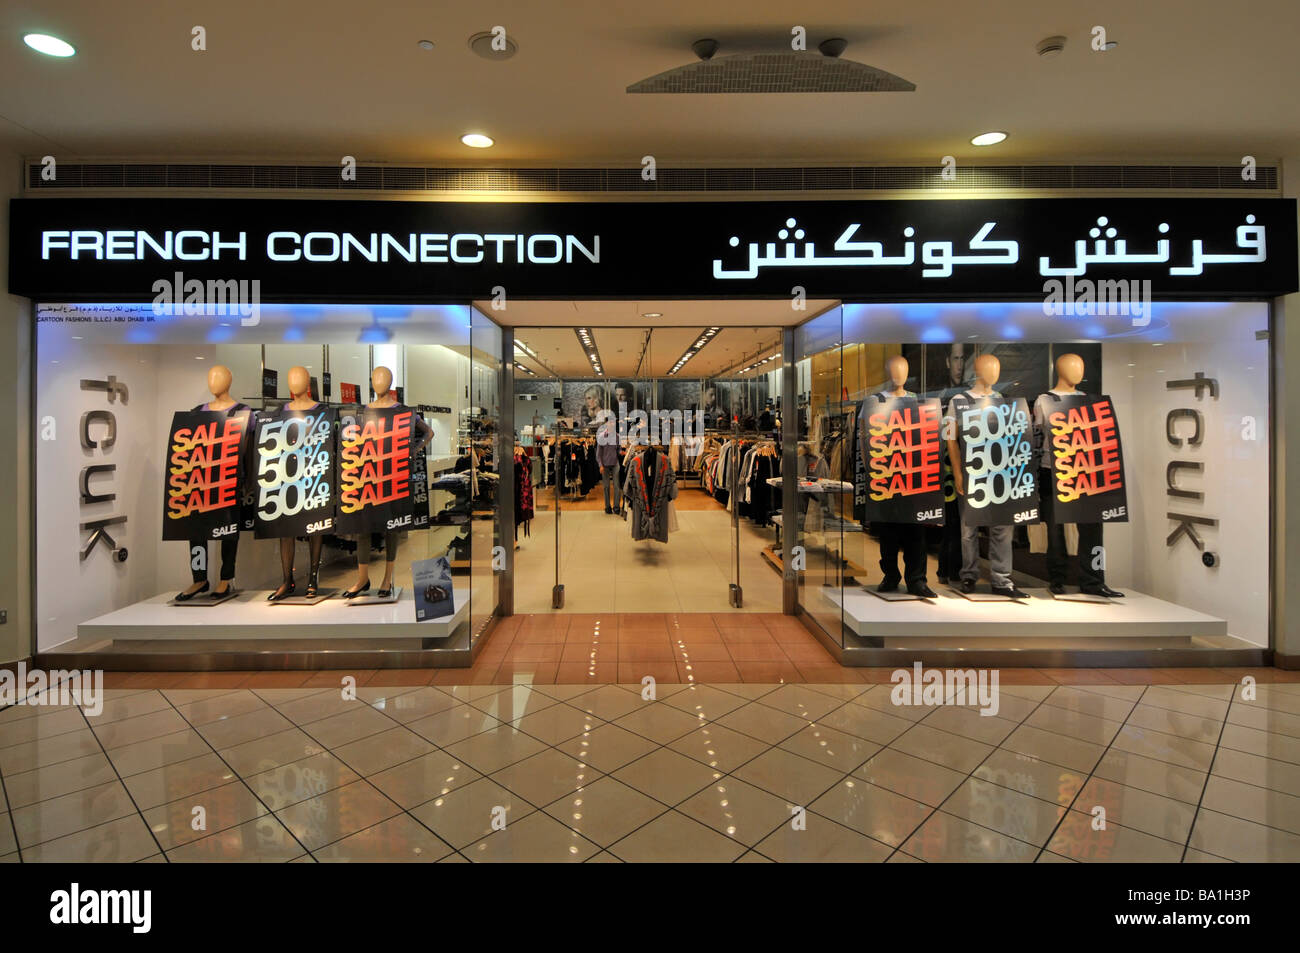 Marina shopping mall French Connection shop front with two store window sale displays & bilingual sign above entrance Abu Dhabi UAE Middle East Asia Stock Photo